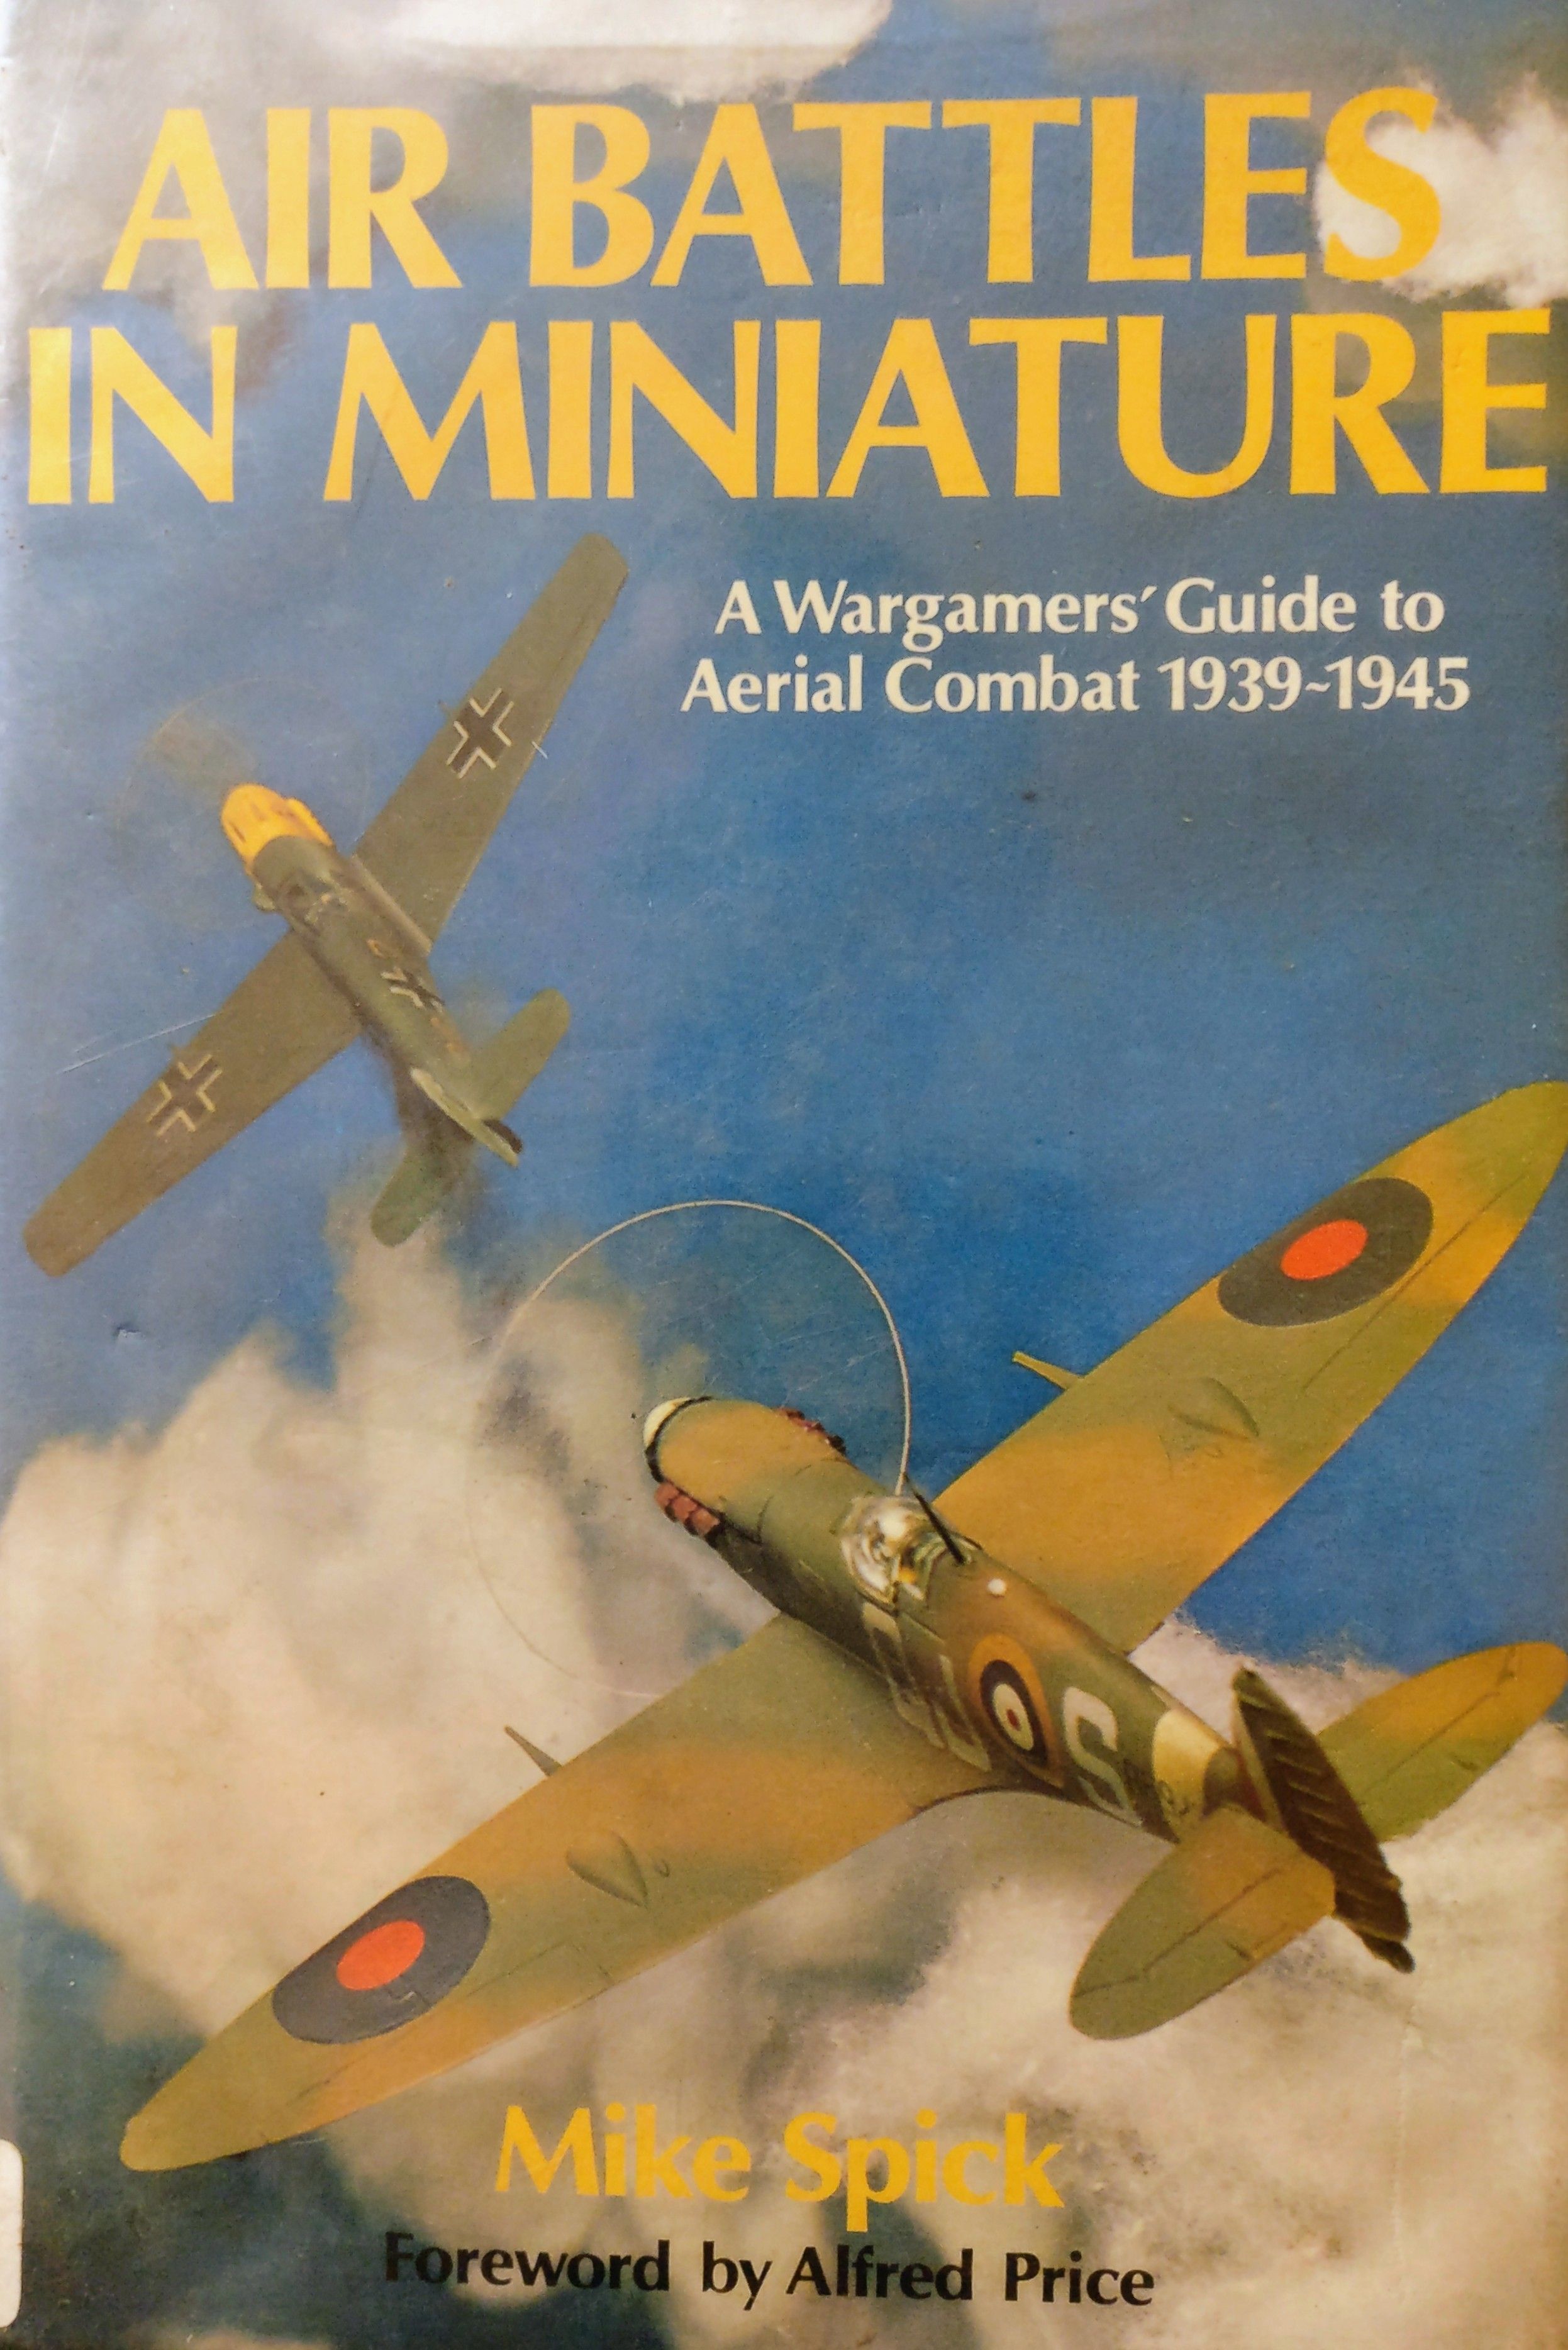 Air Battles in Miniature: A Wargamers' Guide to Aerial Combat 1939-1945